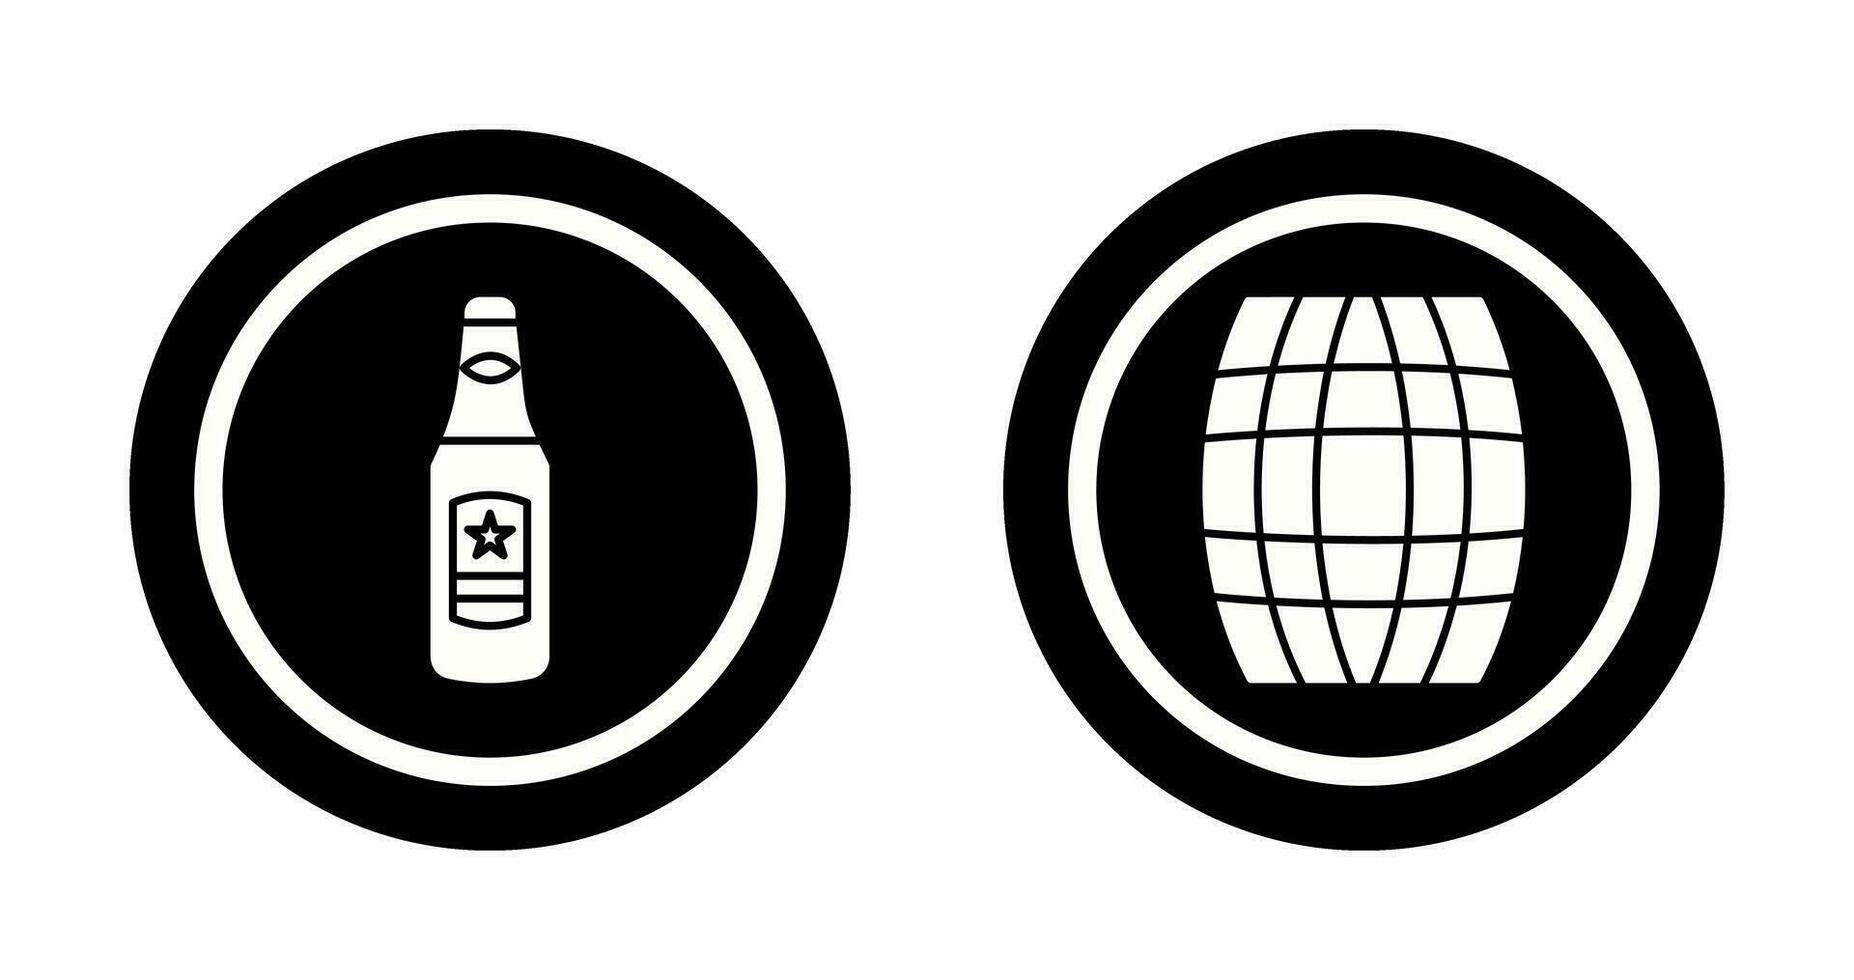 Beer Bottle and Barrel Icon vector